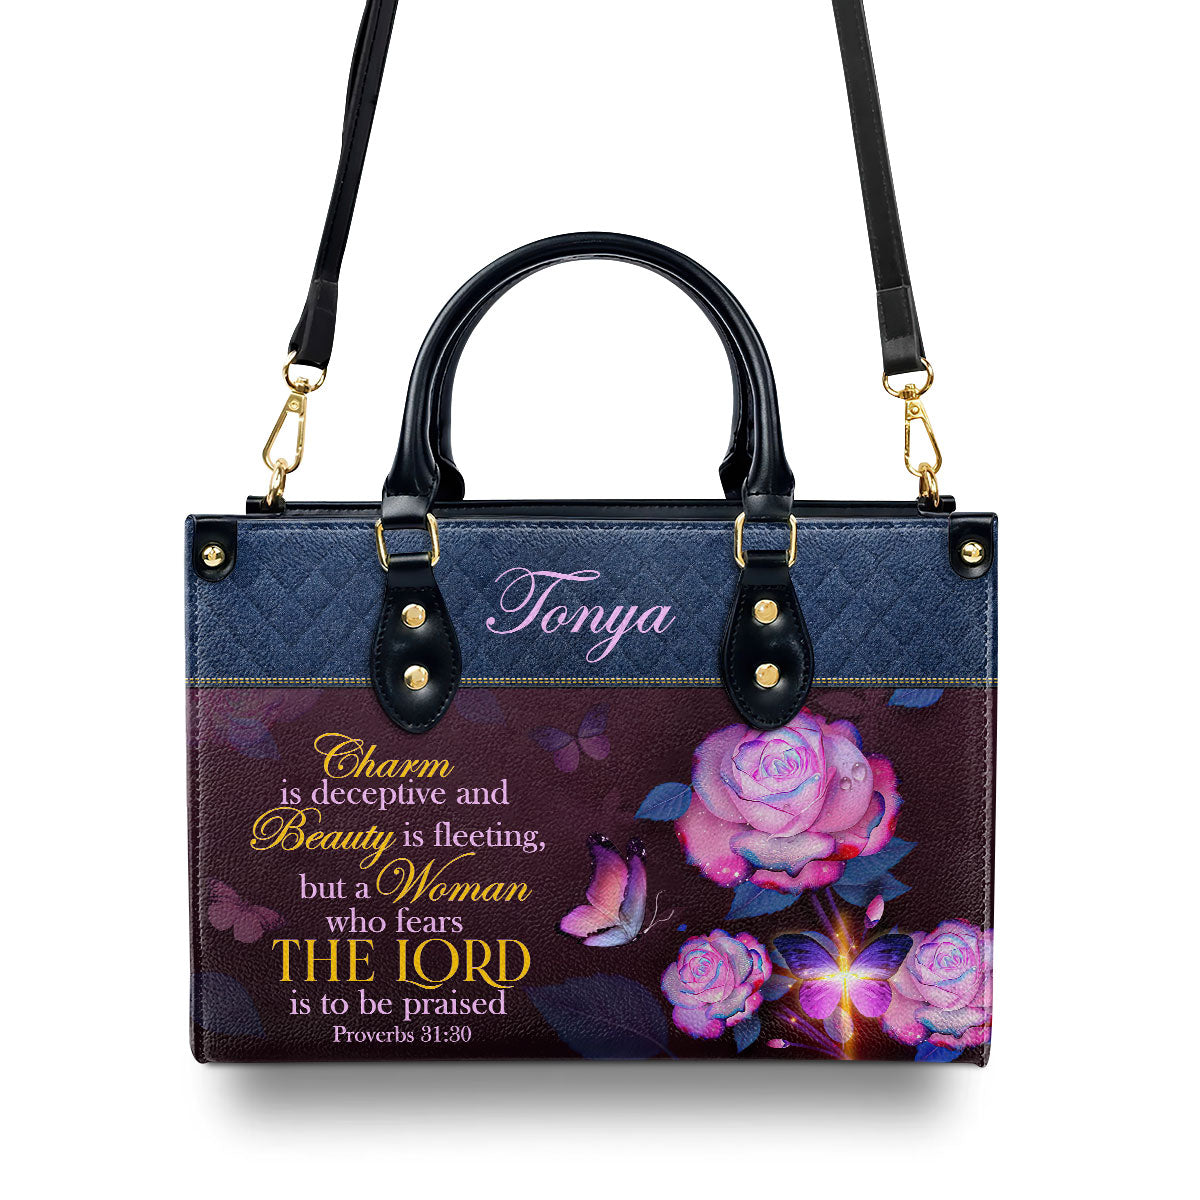 Jesuspirit | Proverbs 31:30 | Personalized Leather Handbag With Handle | Scripture Meaningful Gifts For Christian Women LHBM714